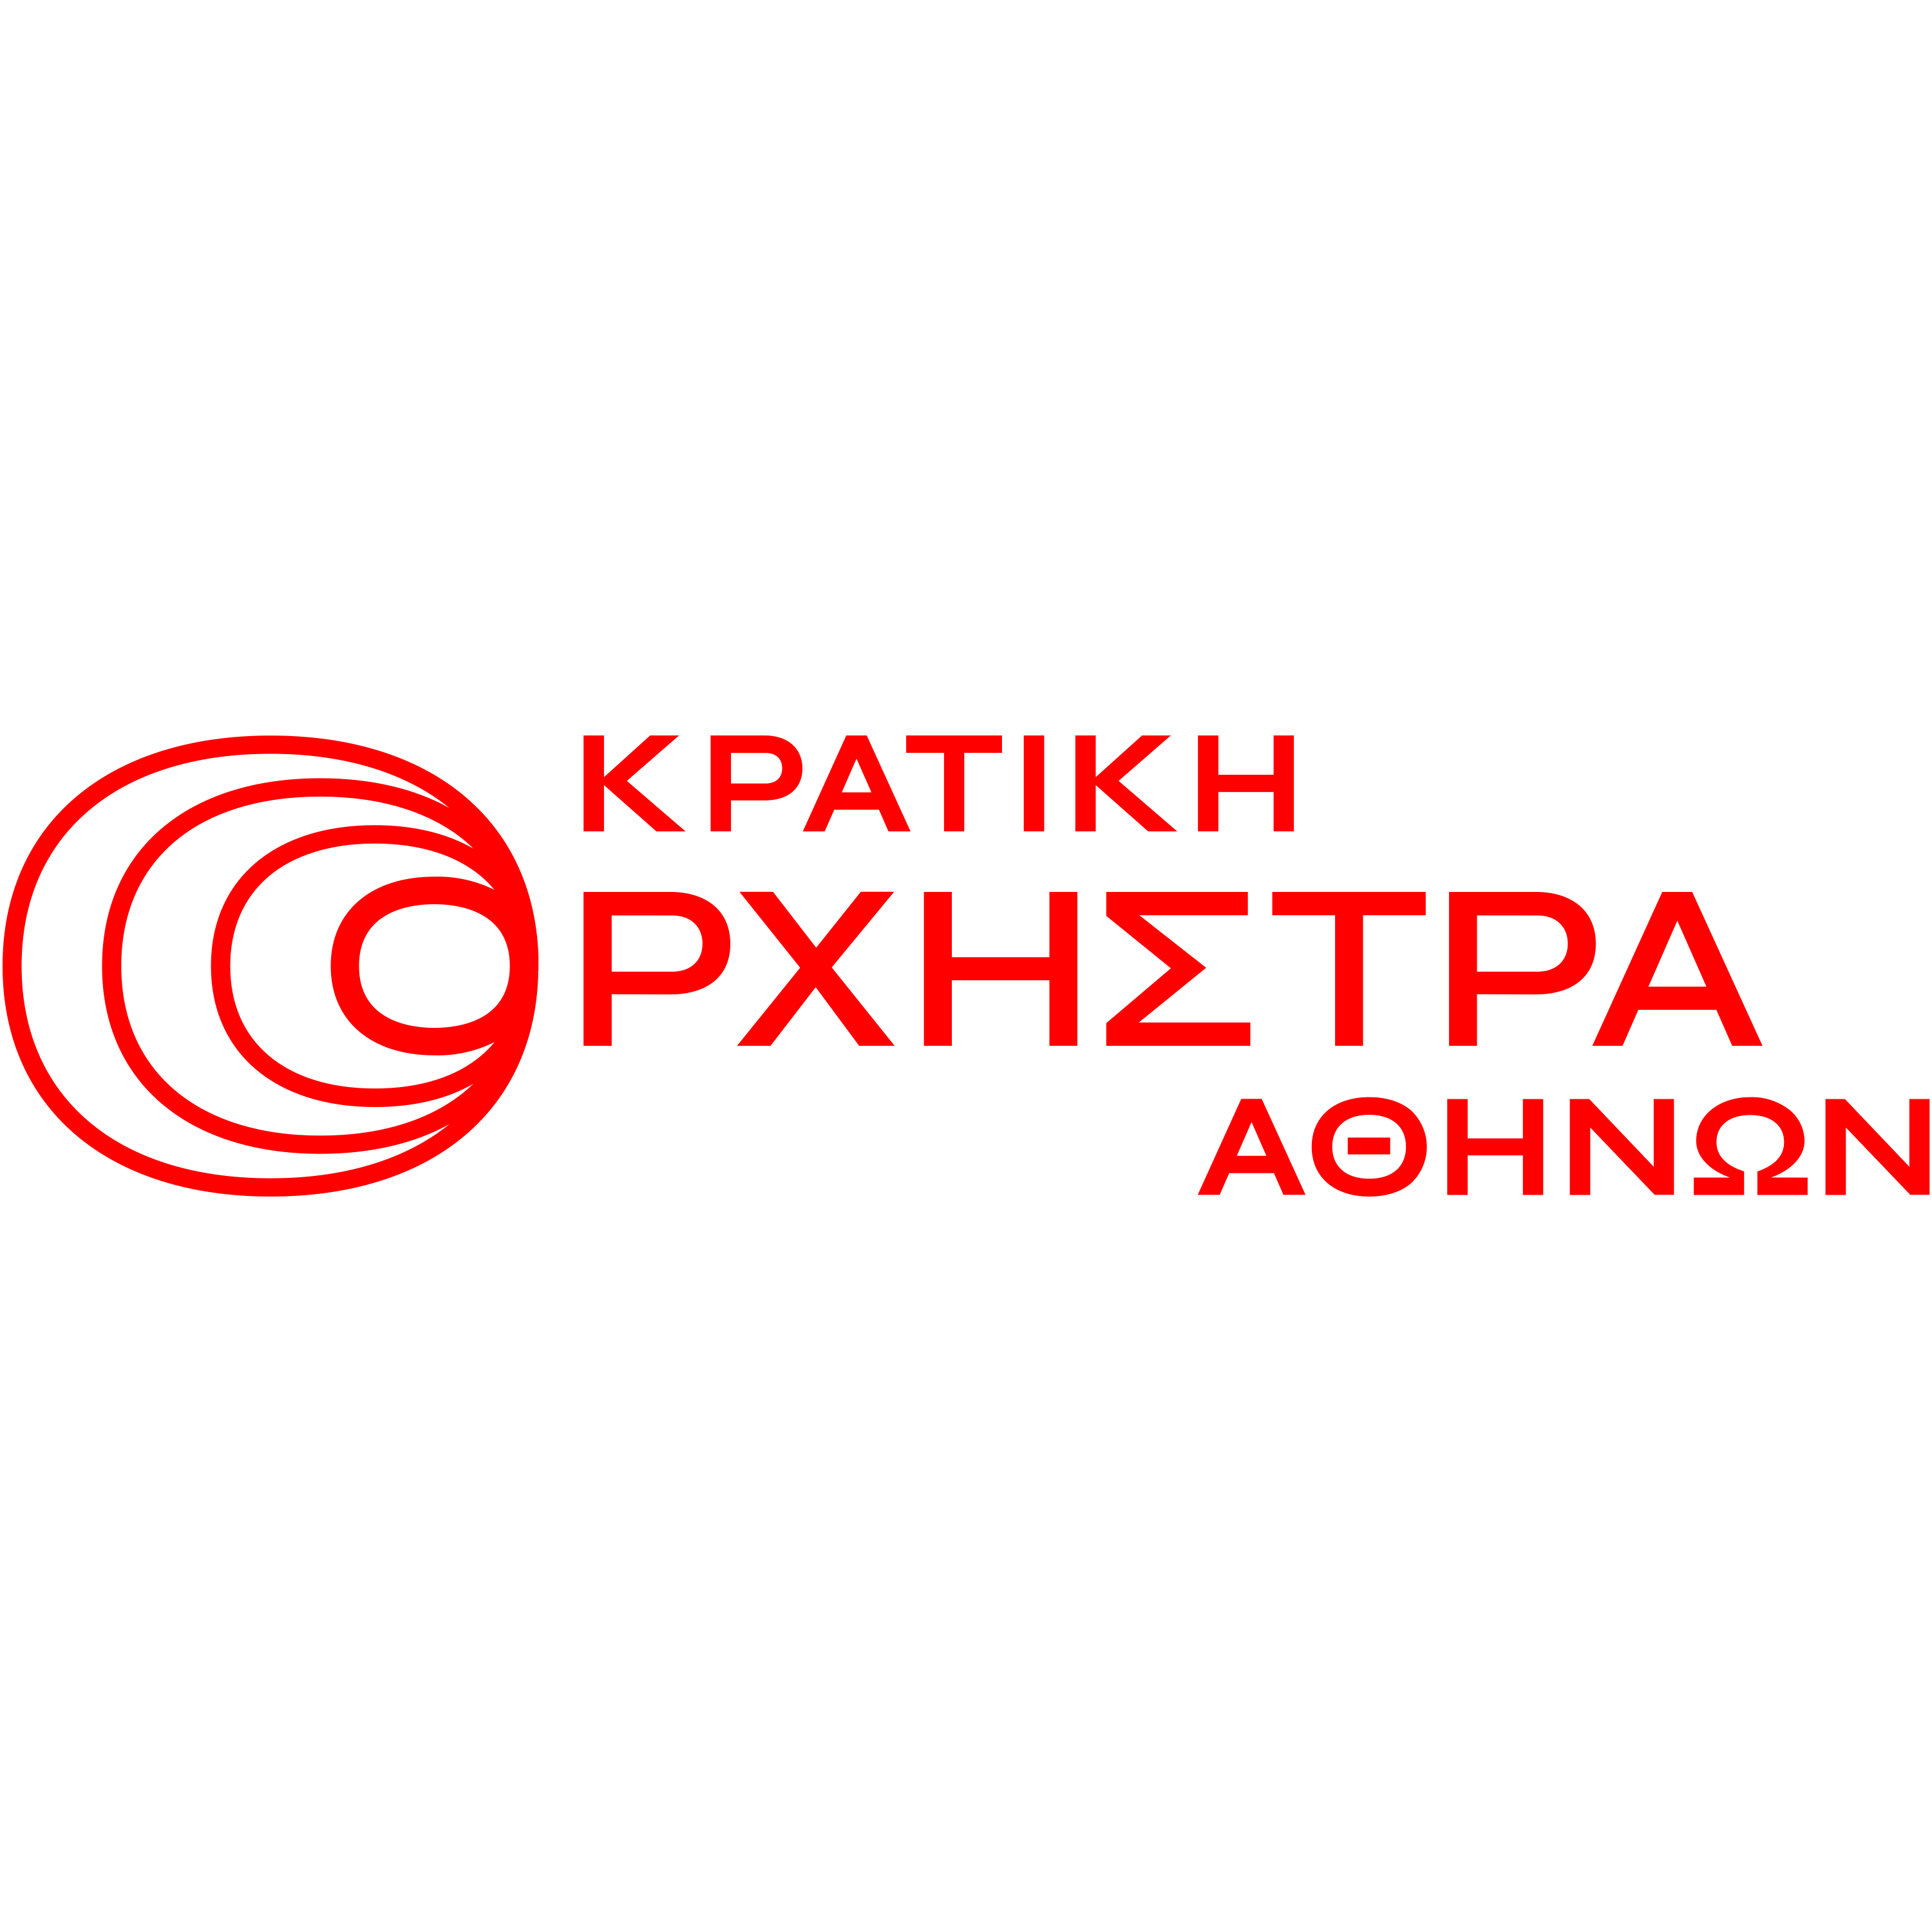 Athens State Orchestra Logo  Transparent Clipart